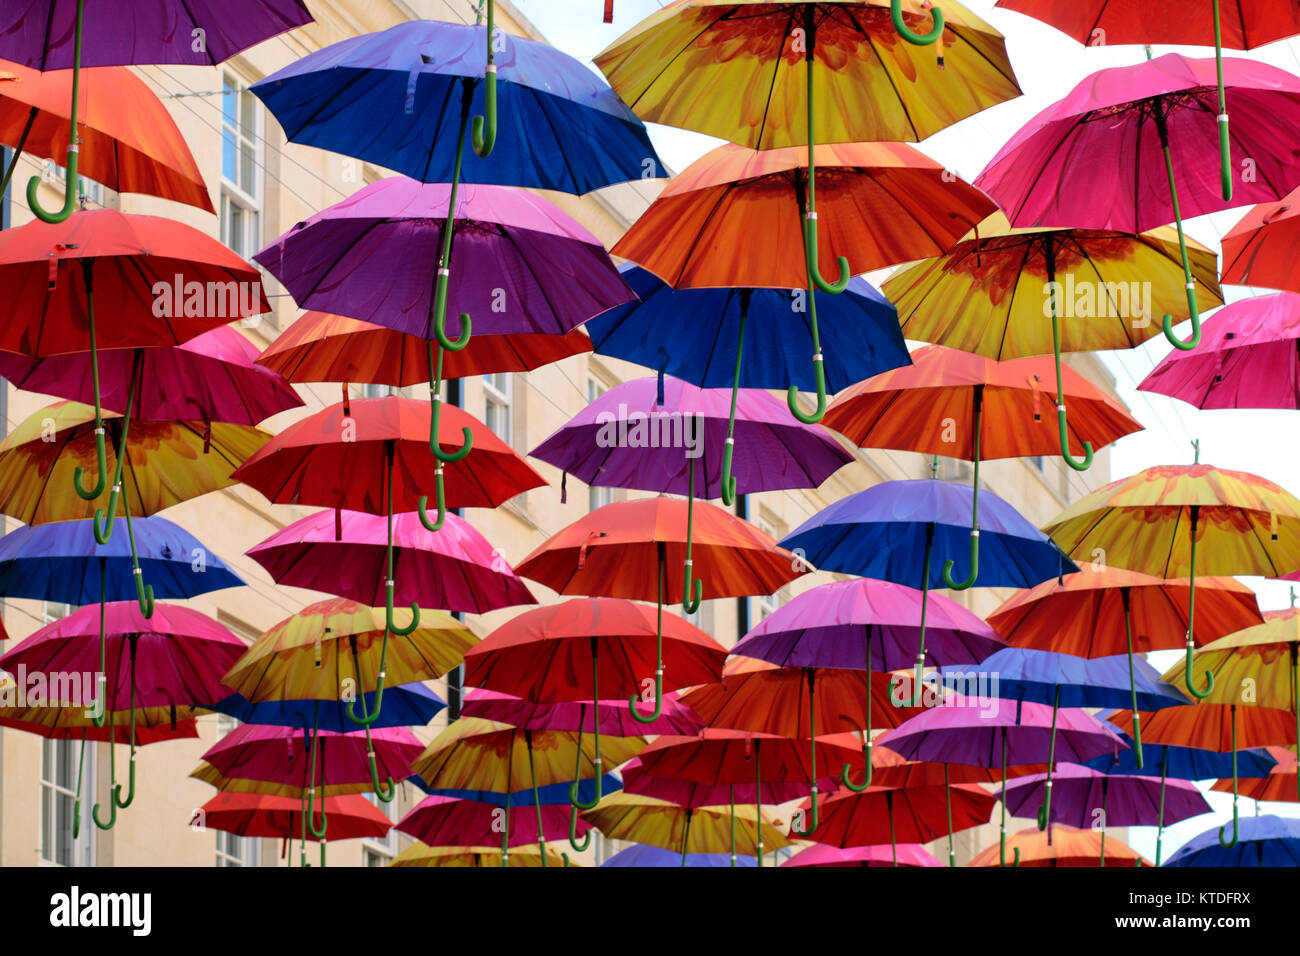 Bright and Colourful Umbrella instalation in Southgate Shopping Mall, Bath, Somerset Stock Photo